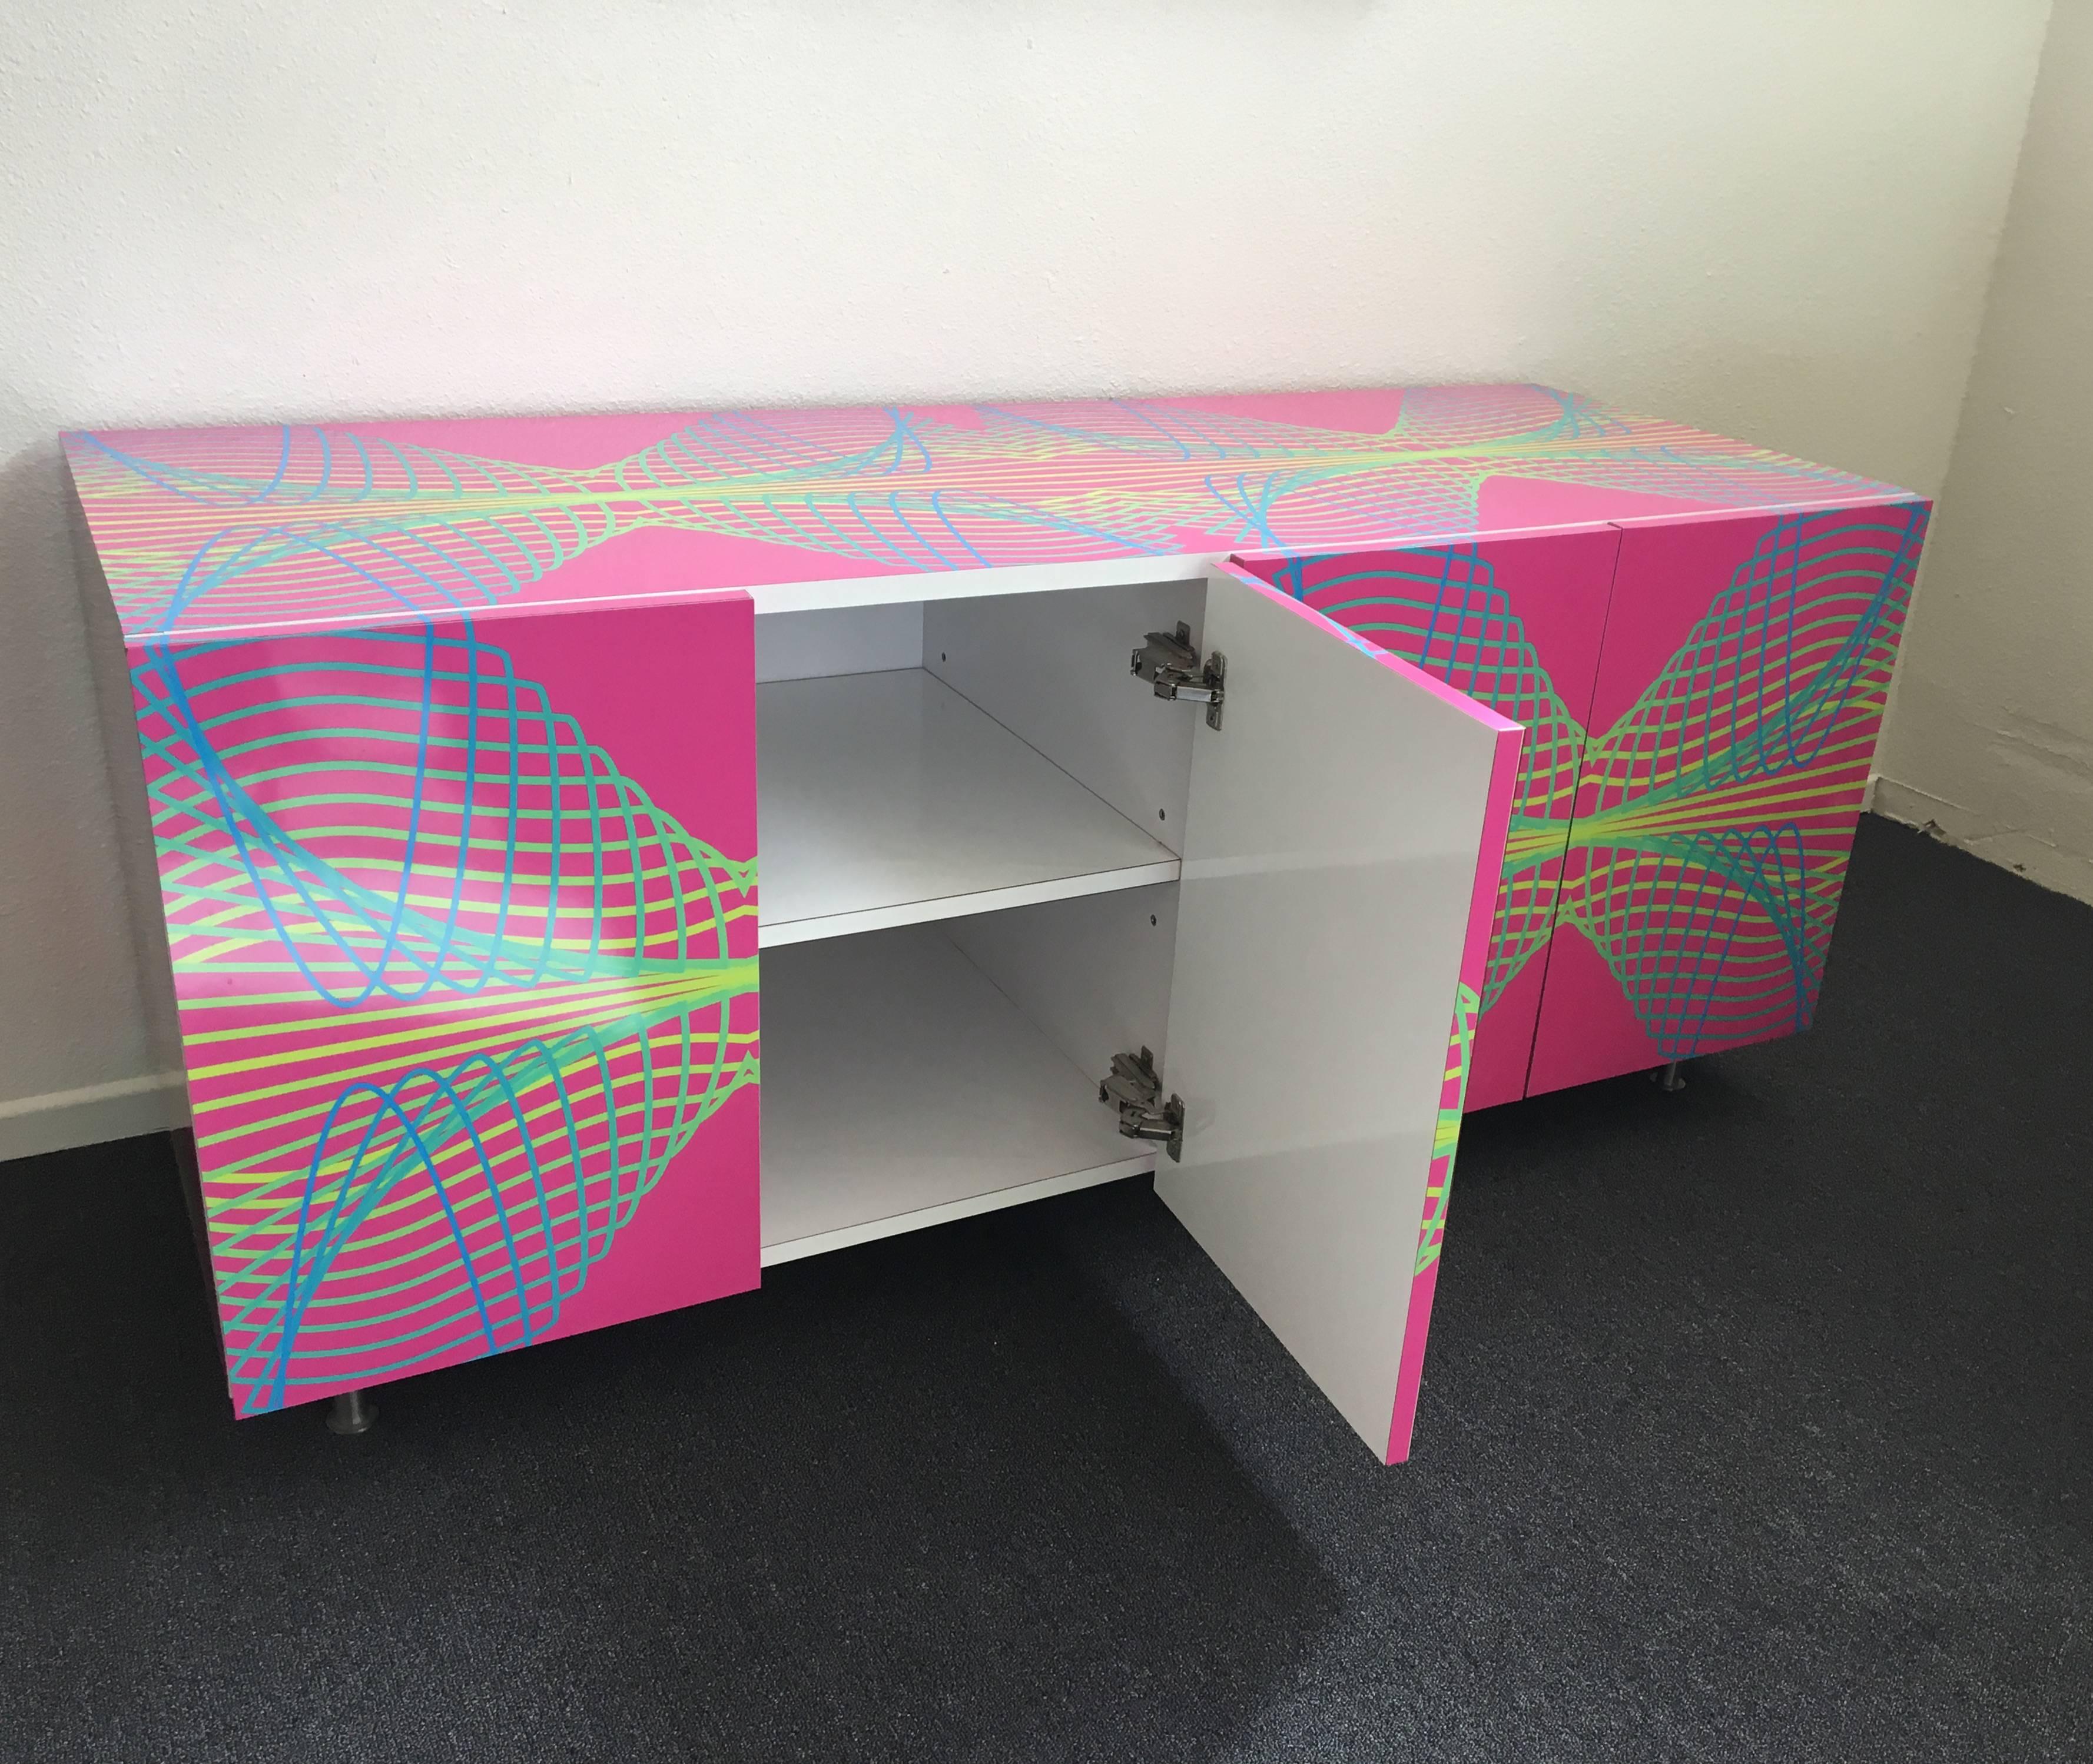 A colorful formica and brushed stainless steel legs studio cabinet by Karim Rashid. This was purchased in 2006 from a show he had at M Modern Gallery in Palm Springs. The outside is very colorful with geometric wave patern and the inside is all